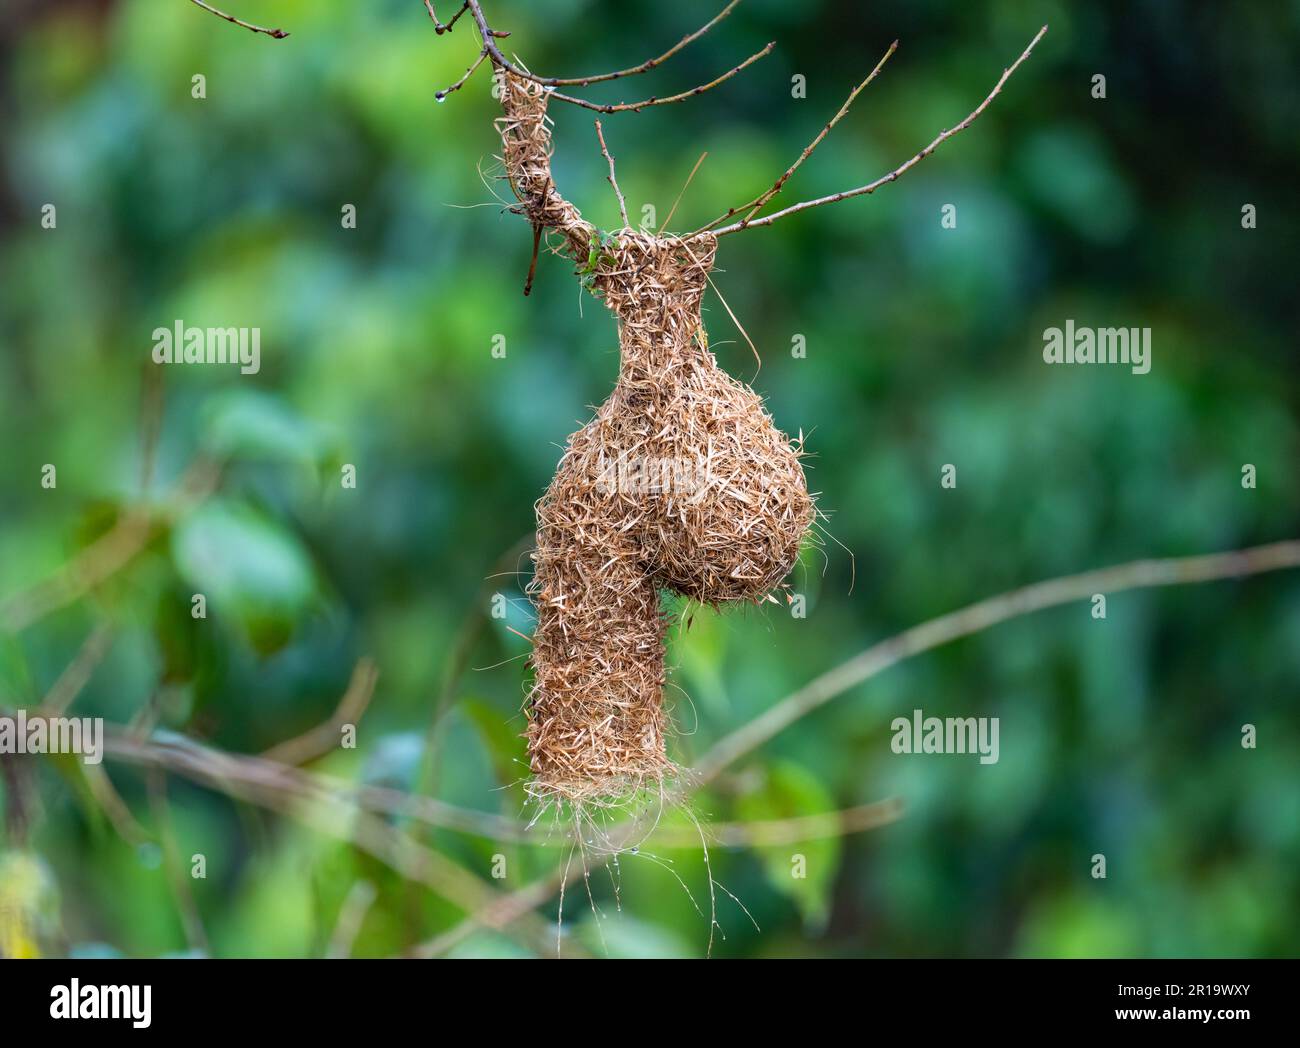 A strange shaped weaver nest hanging from a branch. Kenya, Africa. Stock Photo